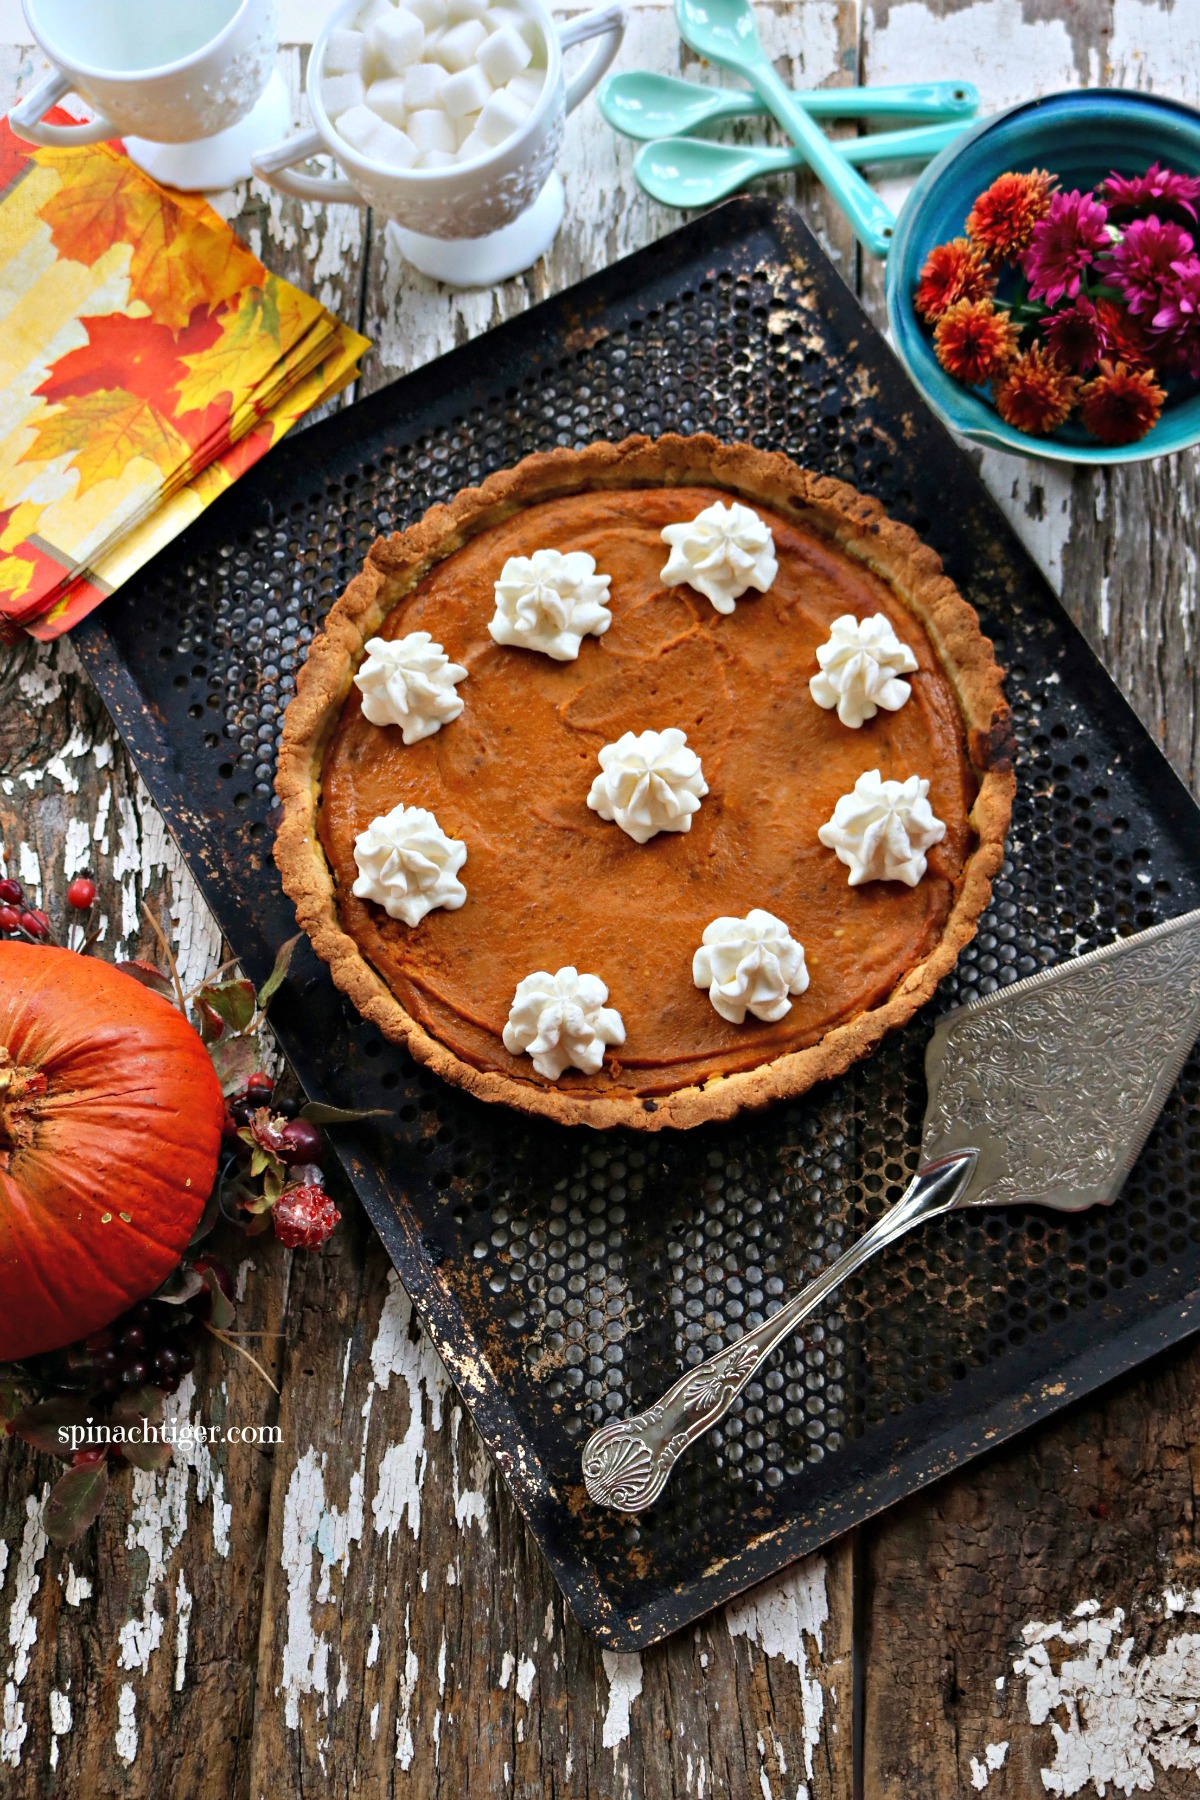 How to Make low carb pumpkin pie with almond flour pie crust from Spinach Tiger